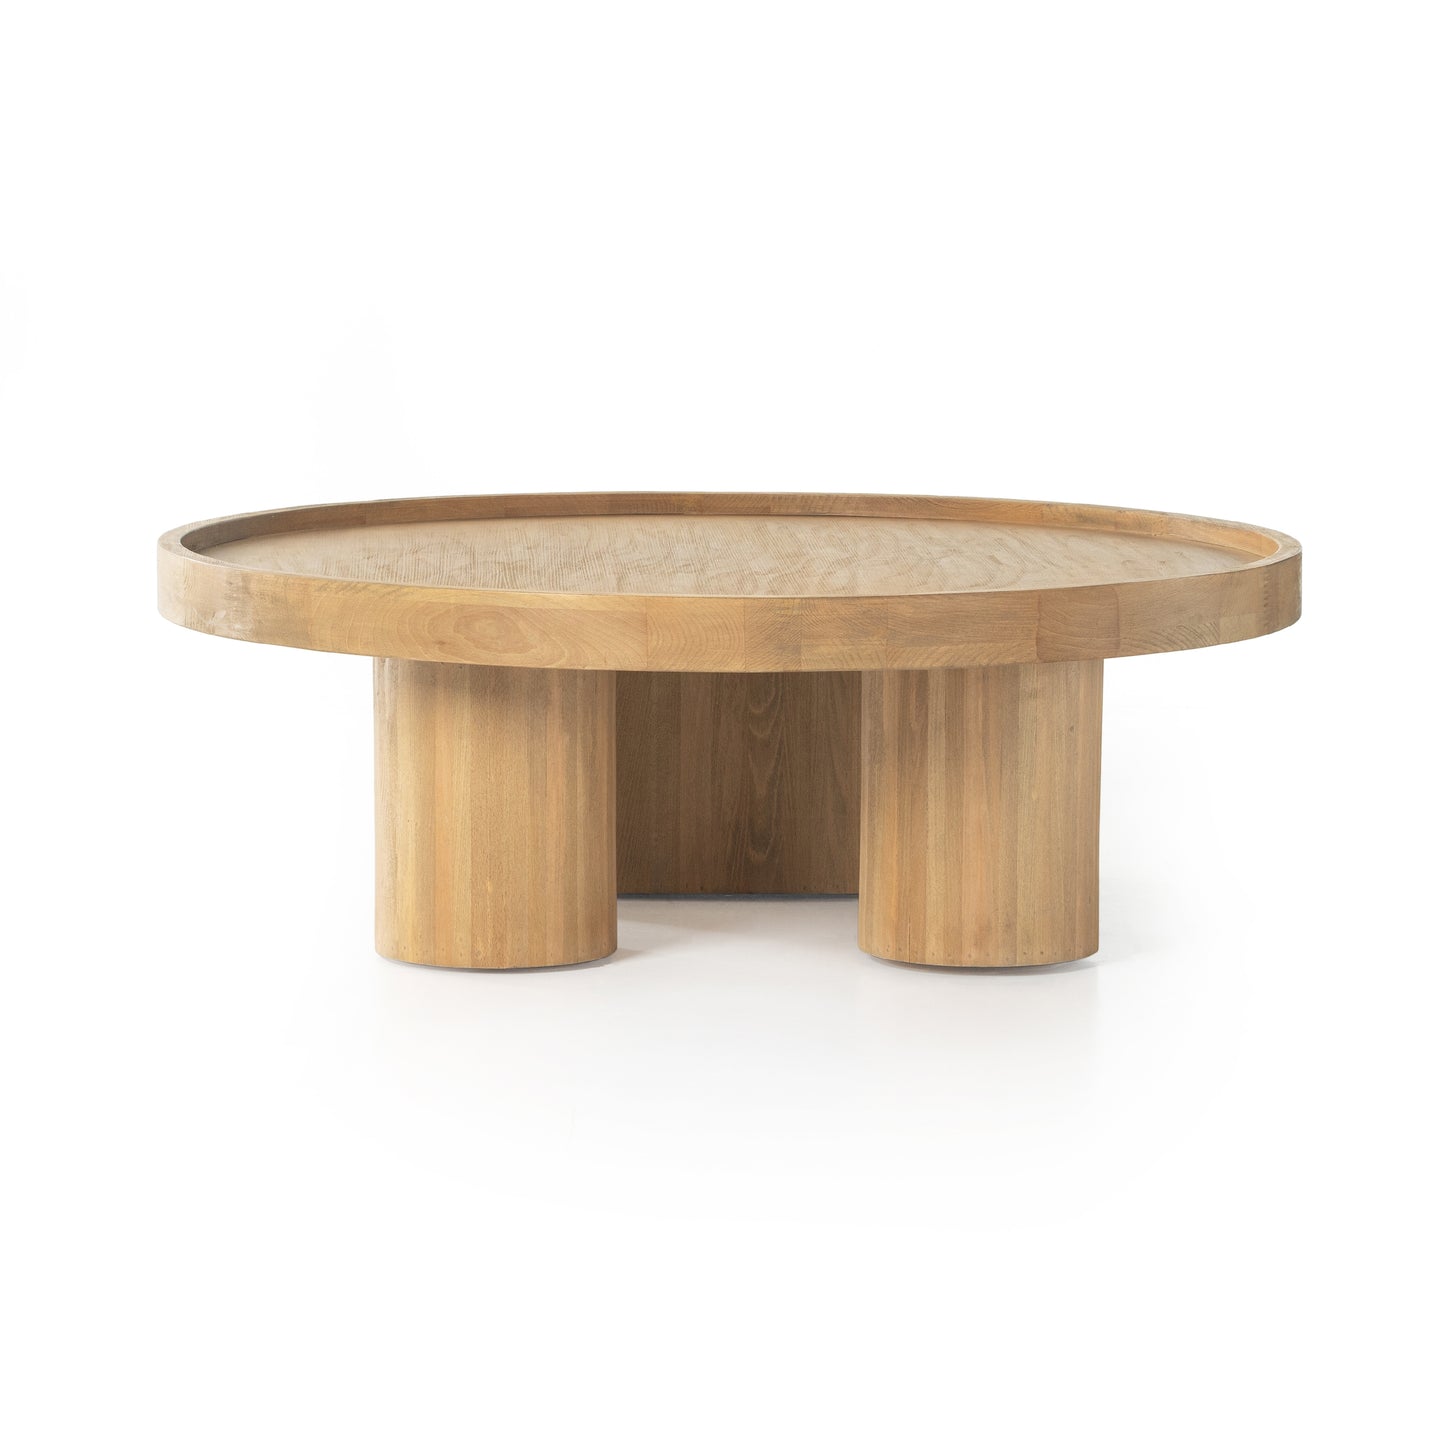 Schwell Coffee Table-Natural Beech Coffee Table Four Hands     Four Hands, Mid Century Modern Furniture, Old Bones Furniture Company, Old Bones Co, Modern Mid Century, Designer Furniture, https://www.oldbonesco.com/